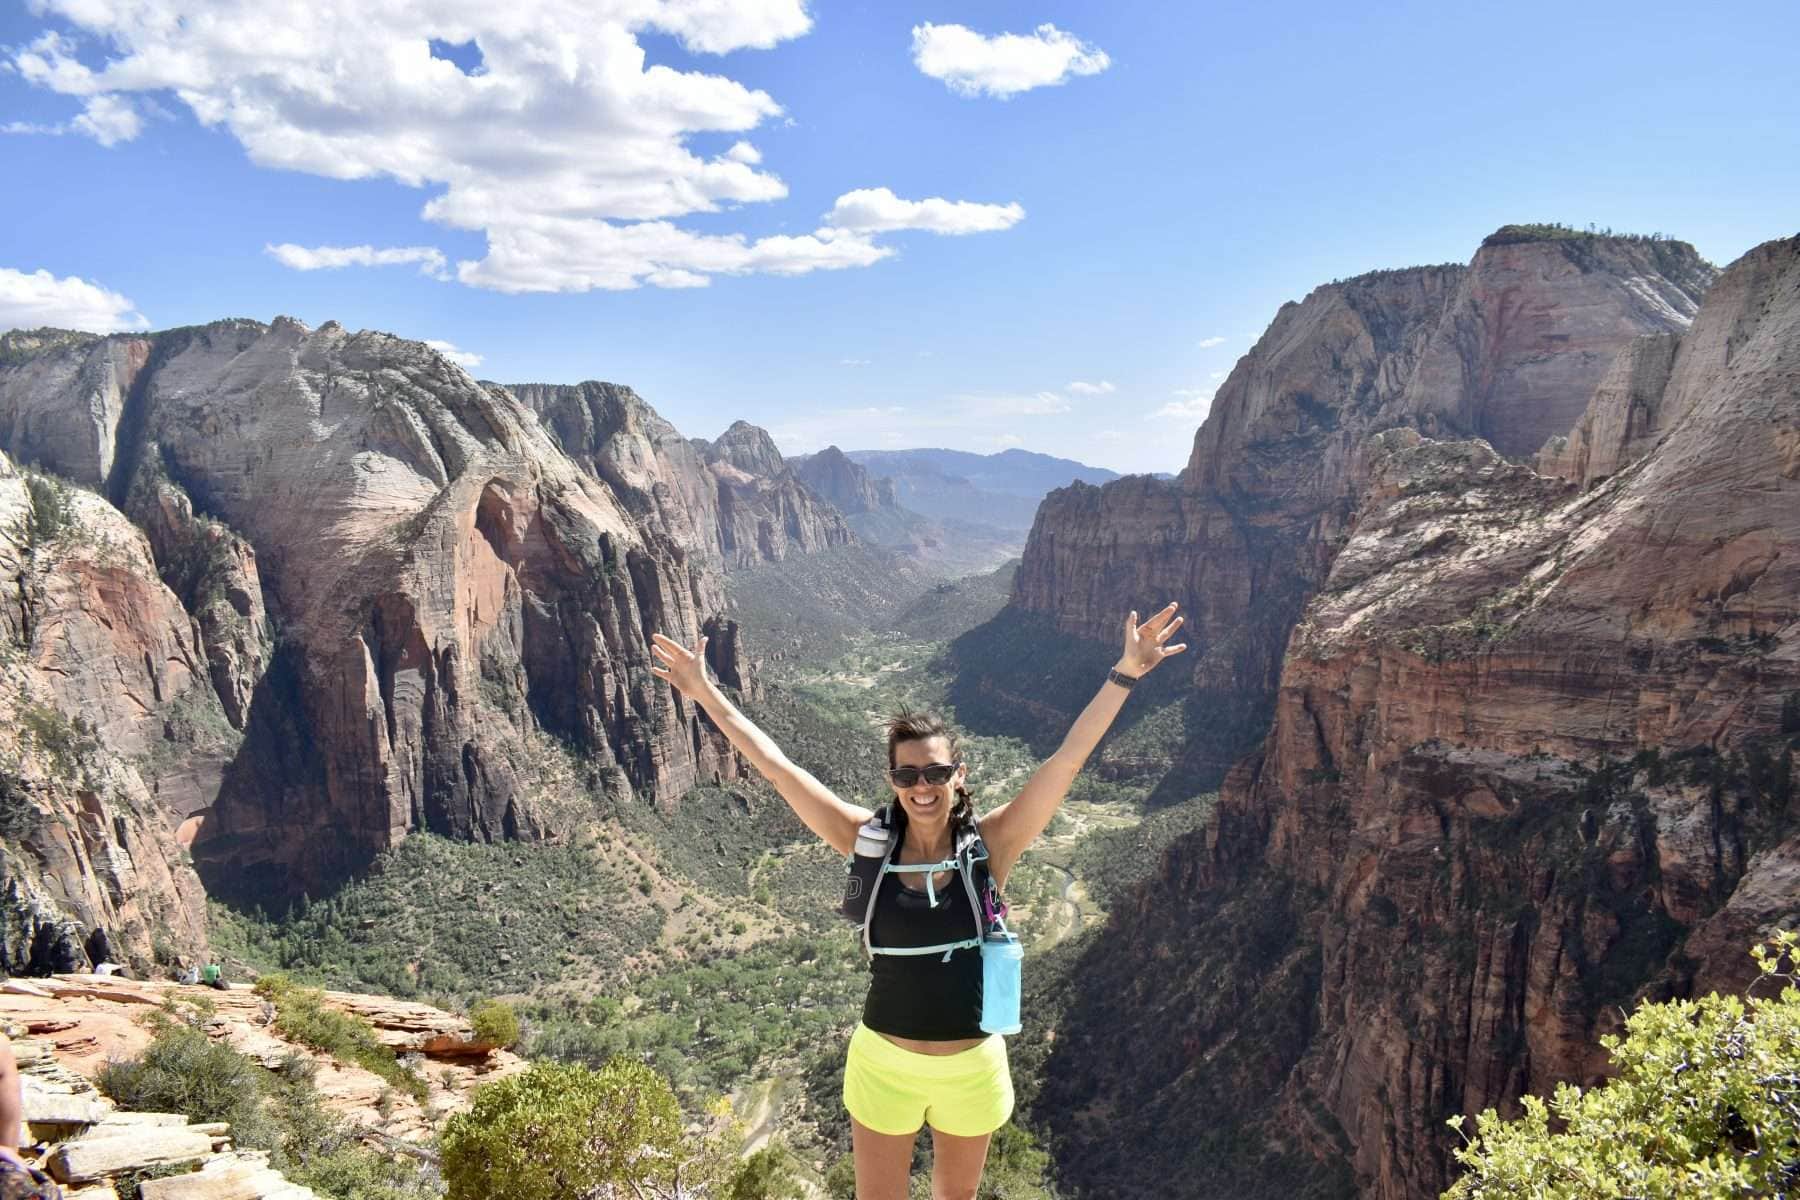 Angels Landing: The Scariest Hike You’ll Never Forget